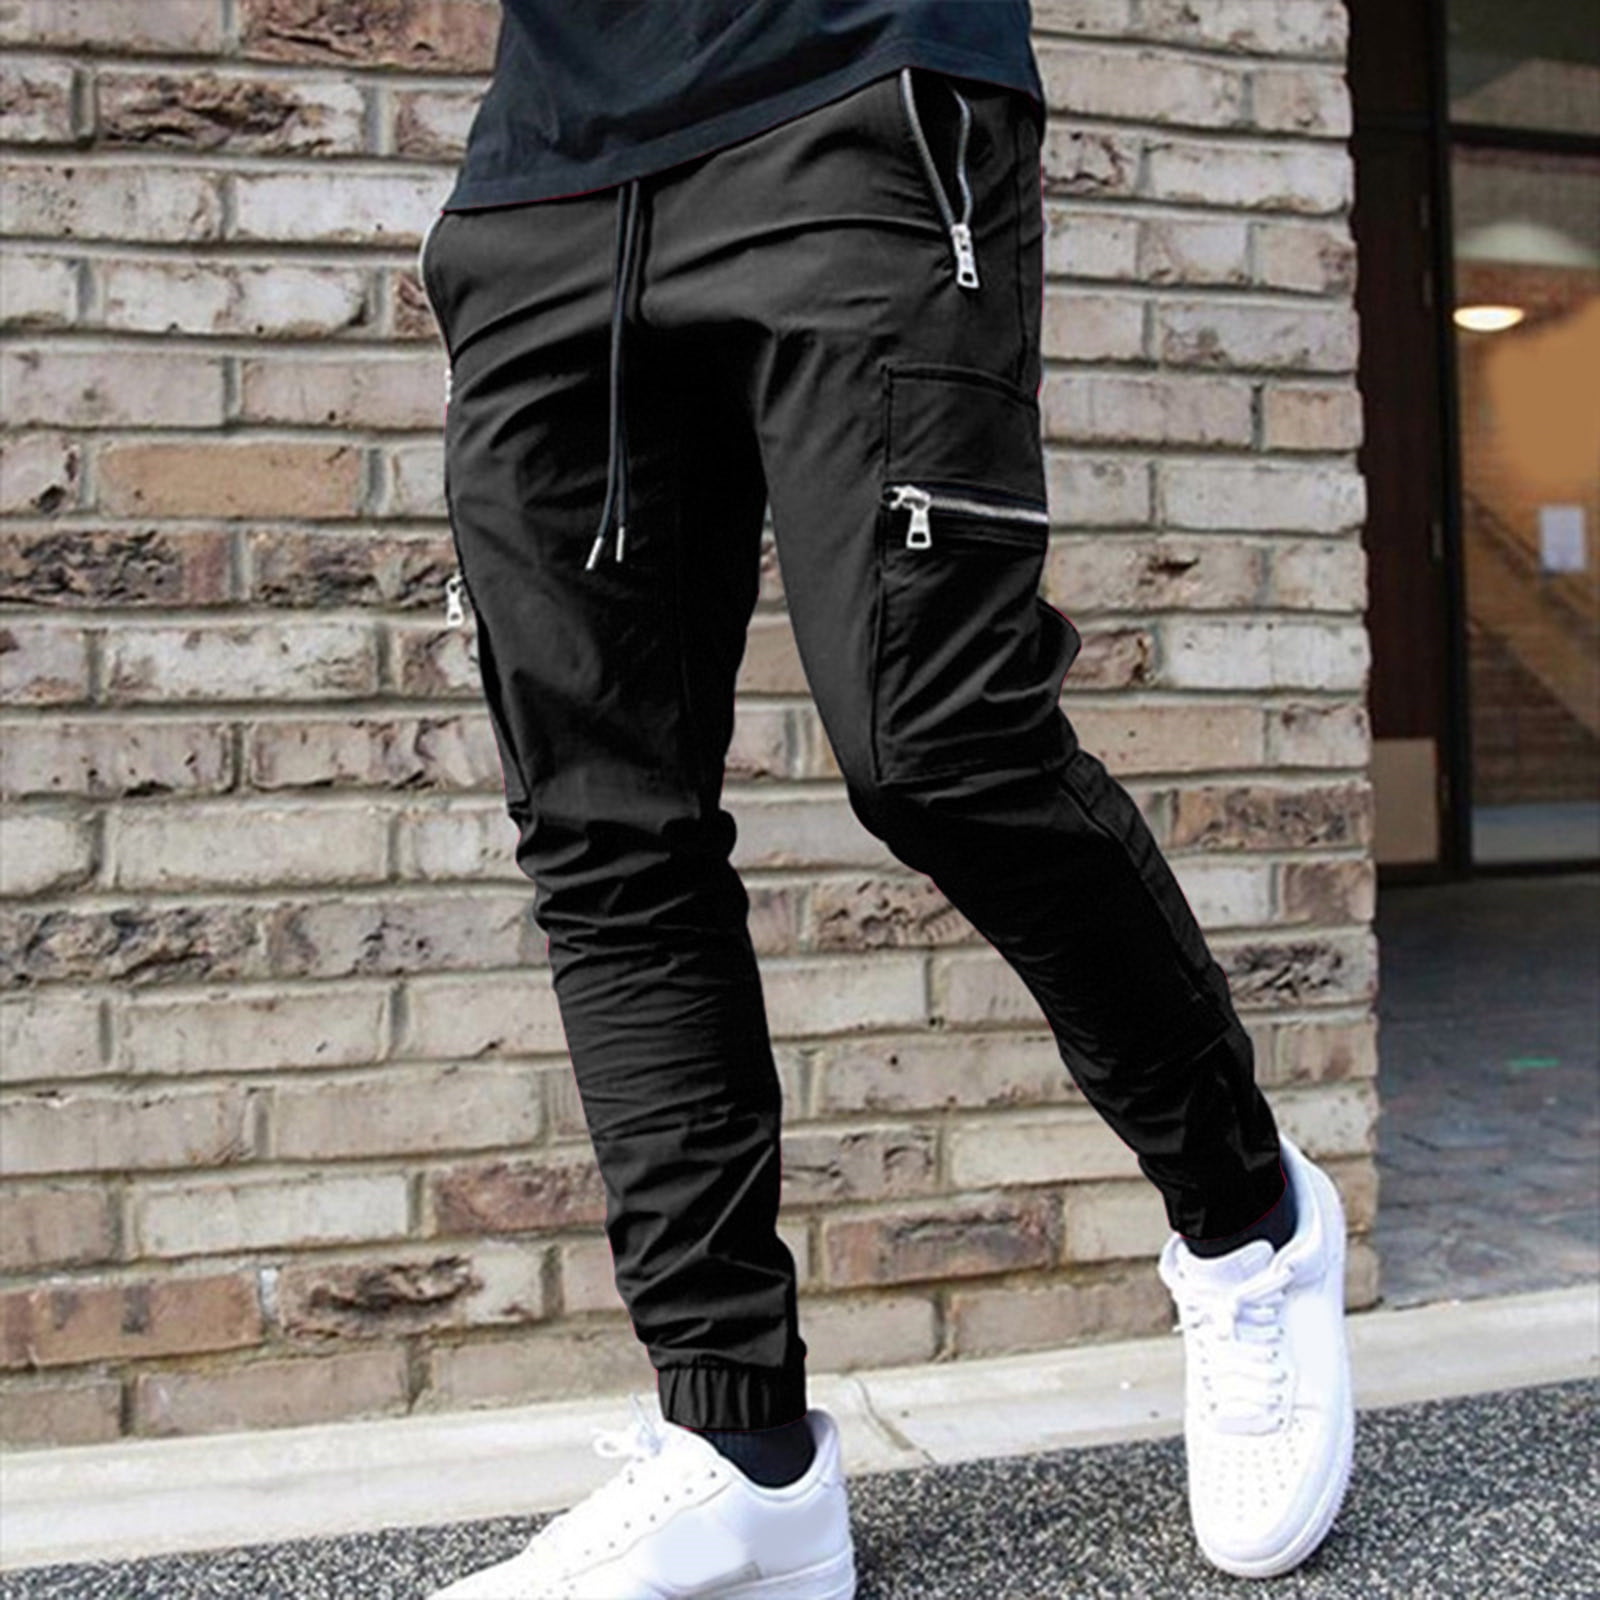 Black Sweatpants Mens Spring And Fashion Autumn Cotton Simple Solid Color  Leisure High Street Elastic Lace Up Pants Trousers Pants